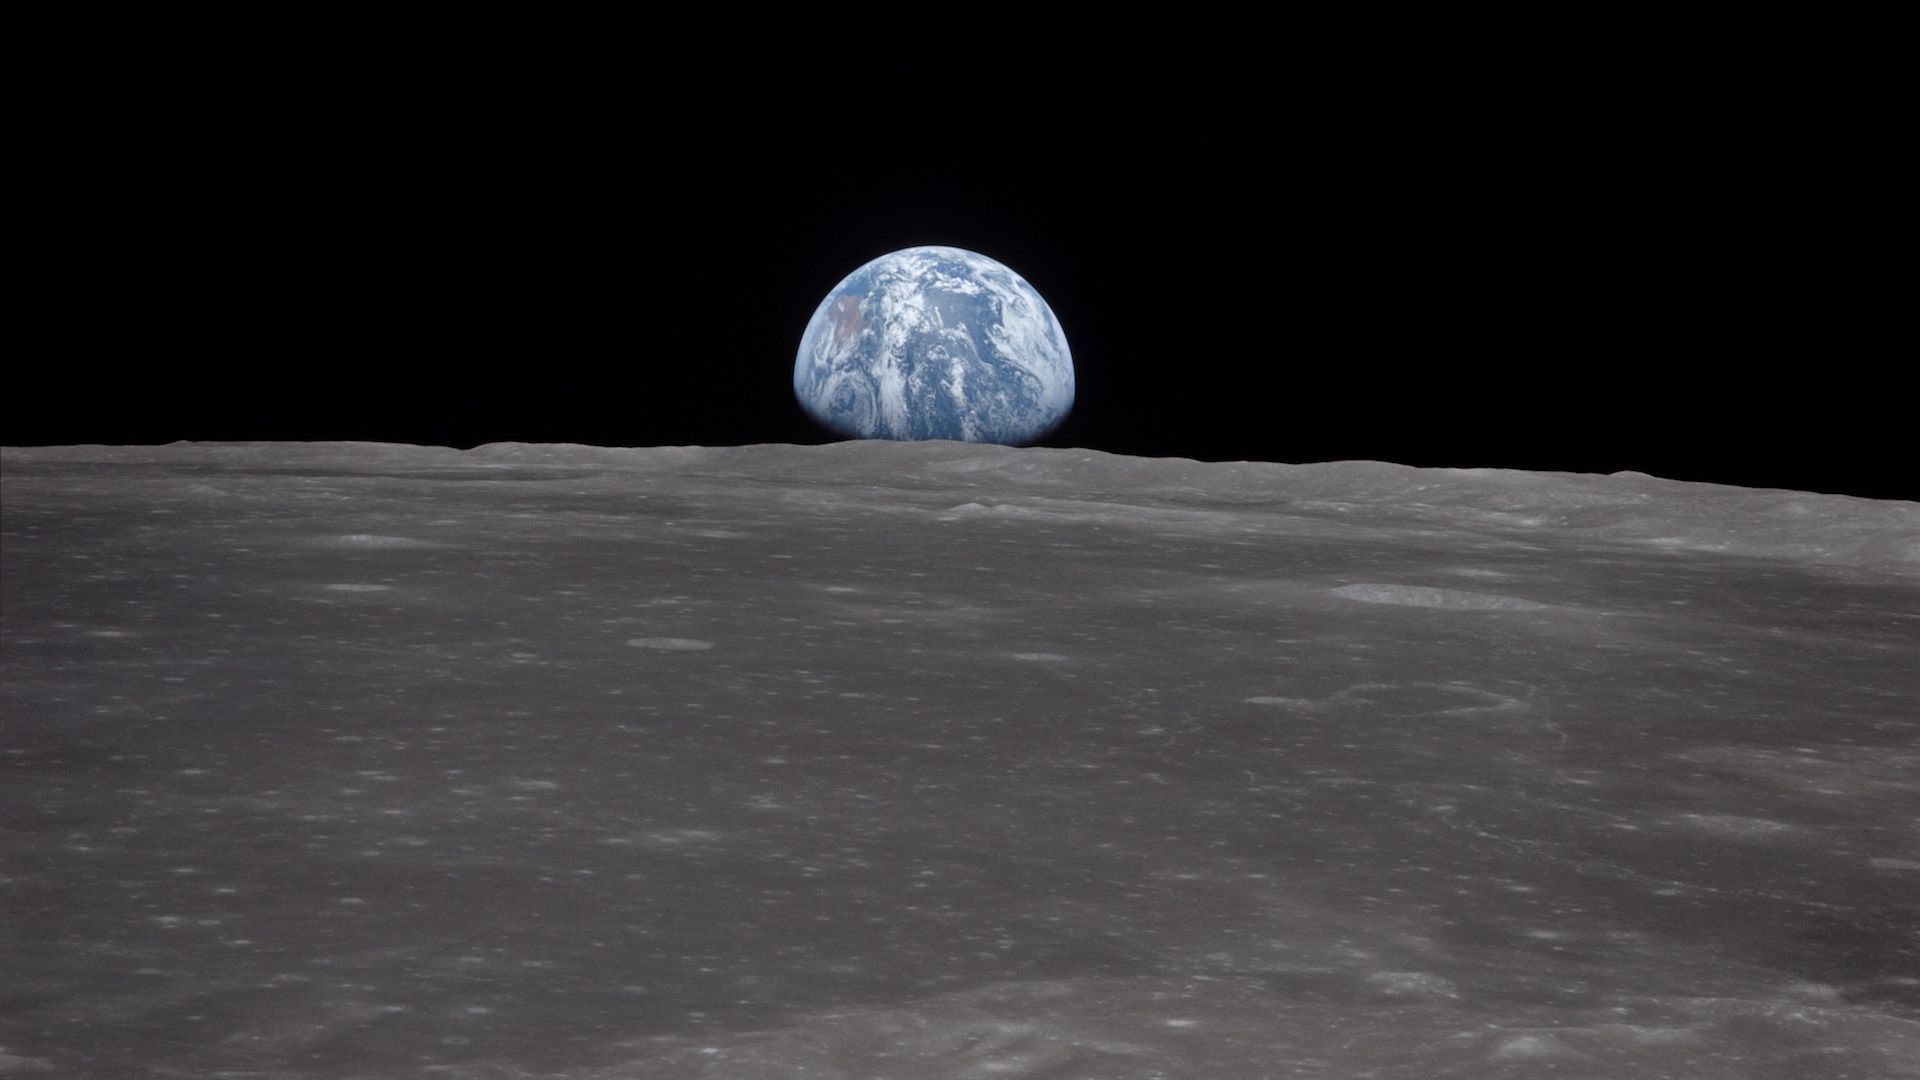 A view of earth from the moon